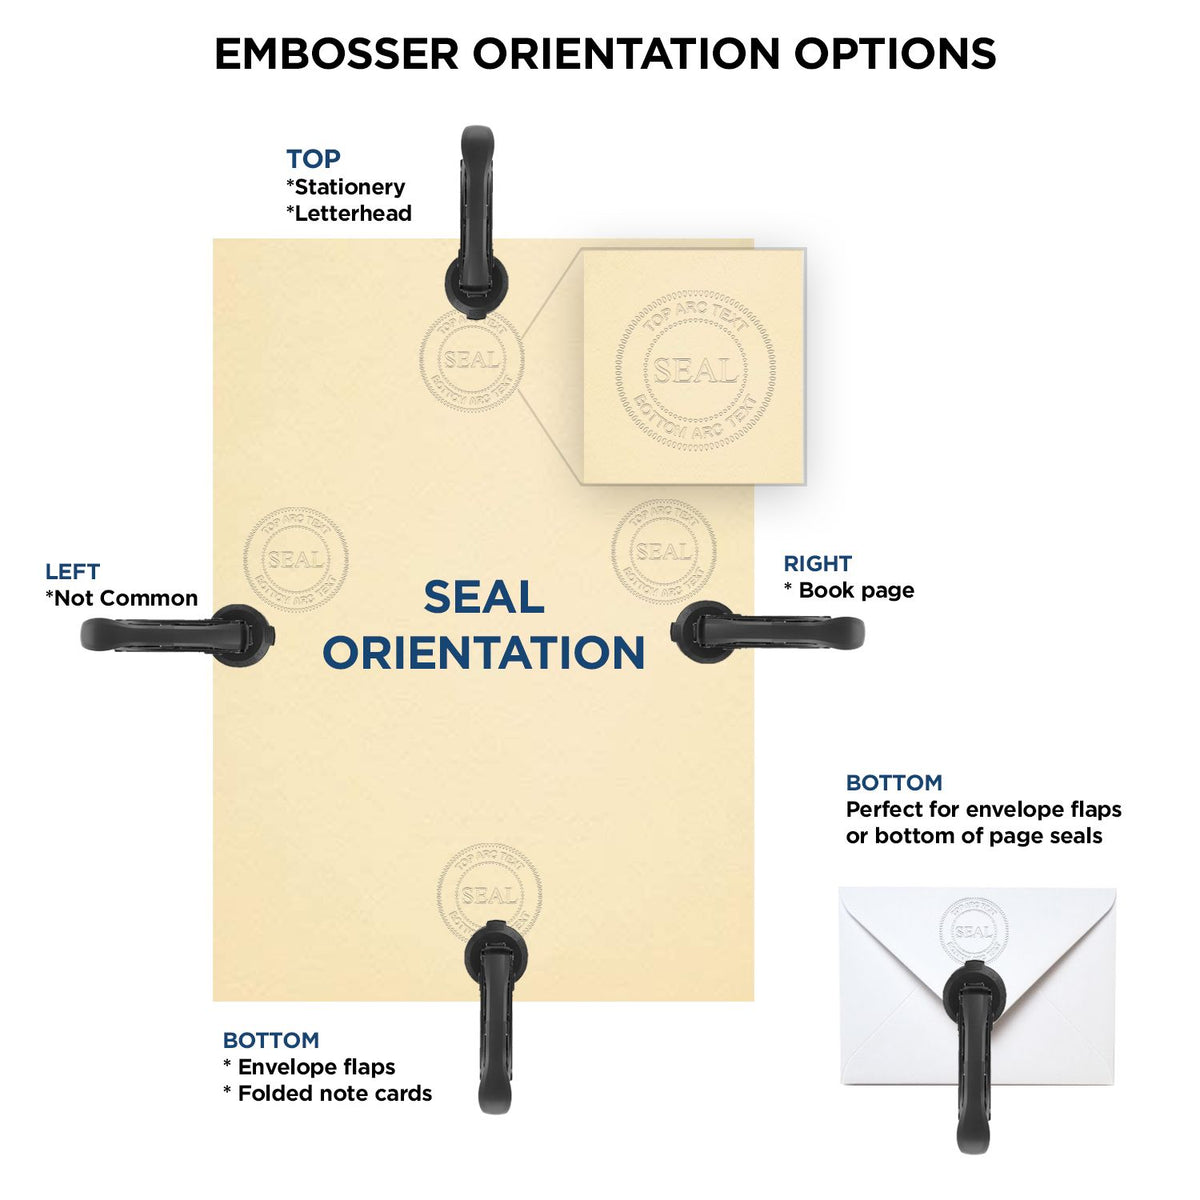 An infographic for the Georgia Desk Surveyor Seal Embosser showing embosser orientation, this is showing examples of a top, bottom, right and left insert.